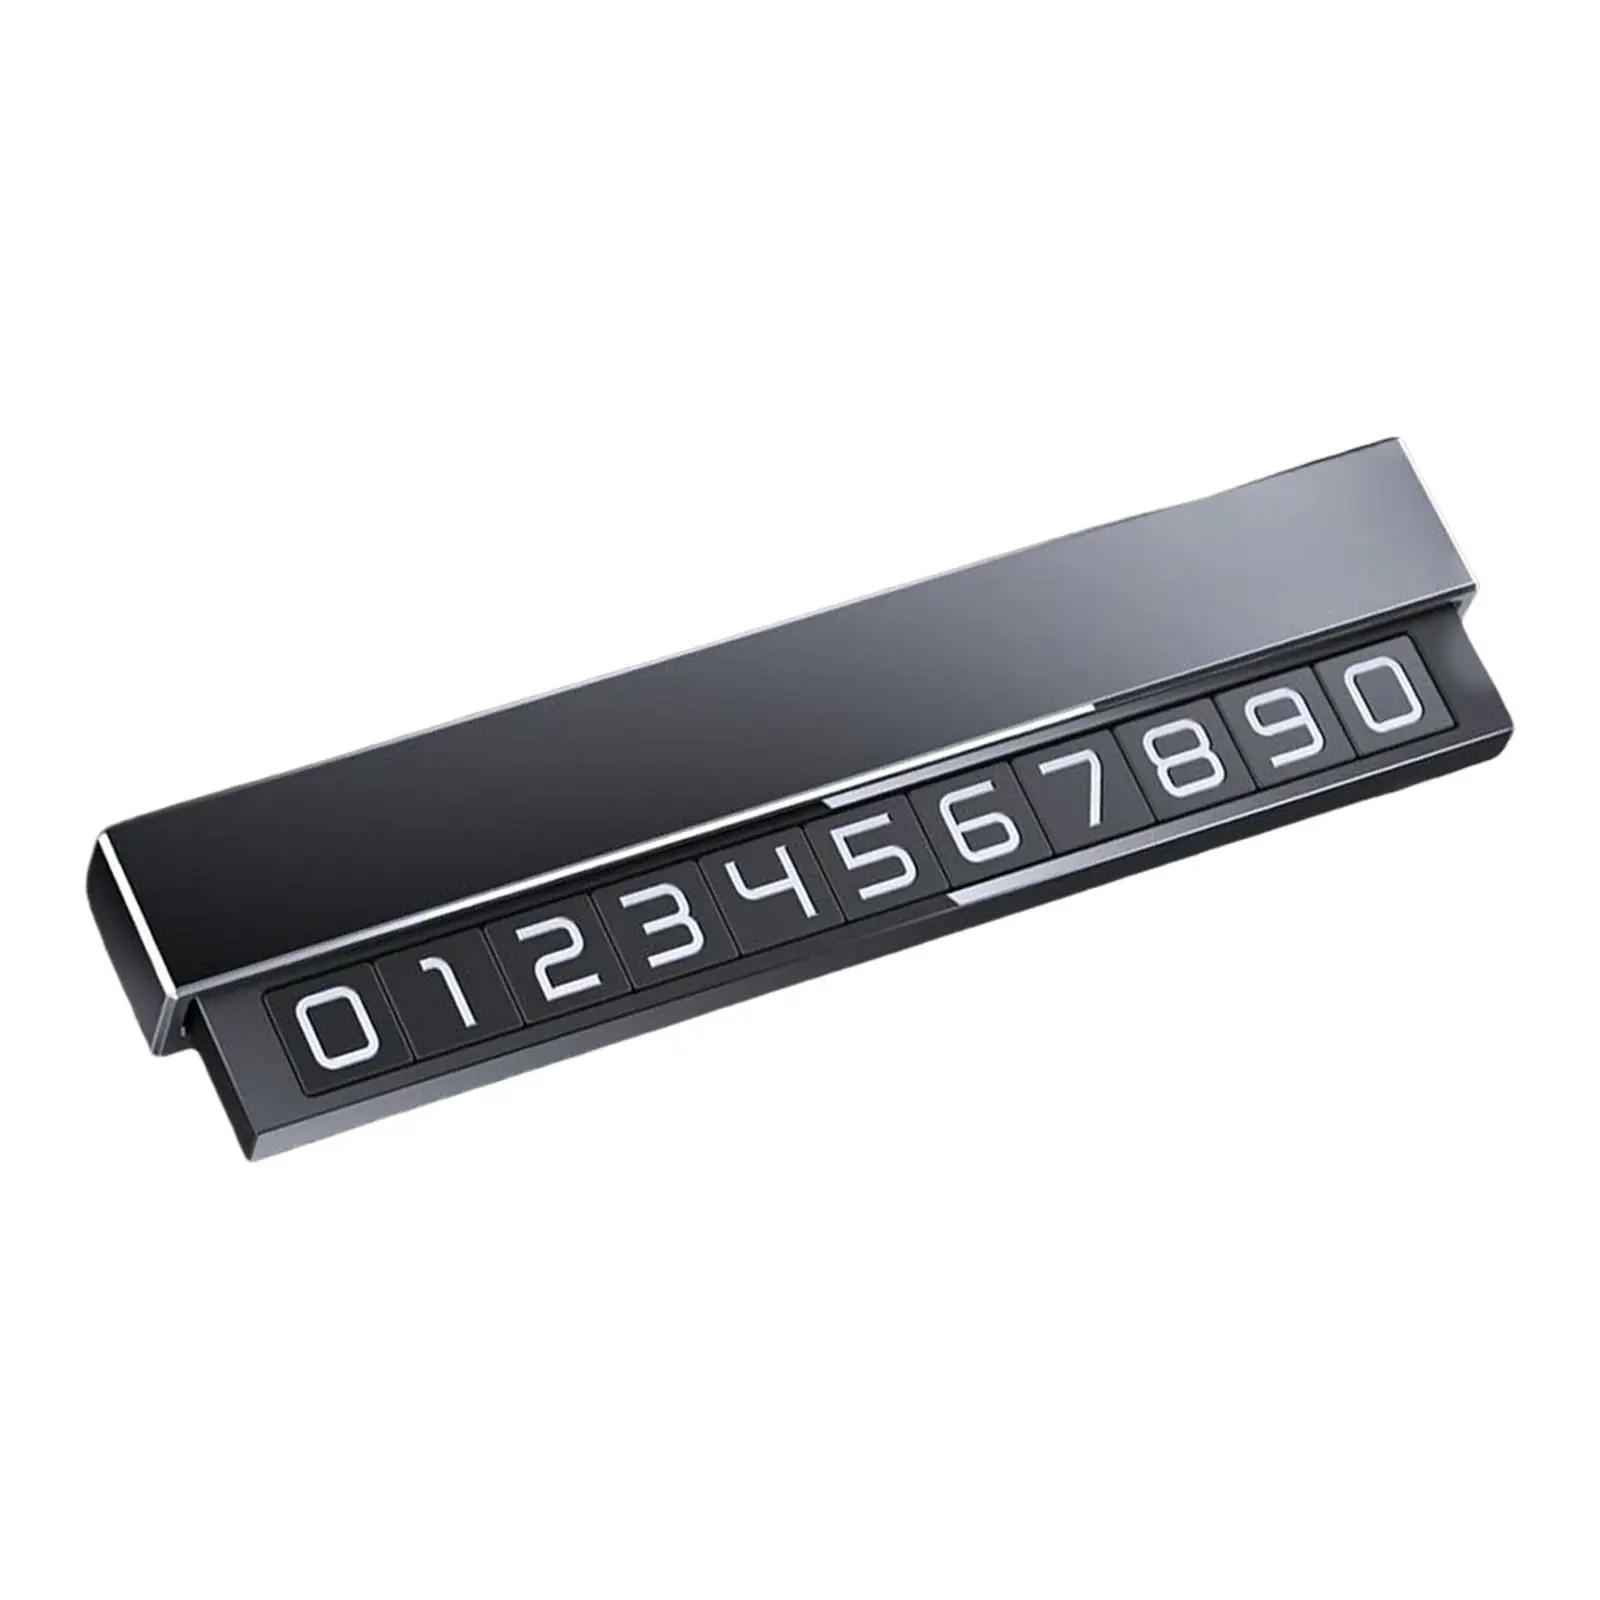 Car Temporary Parking Sign Aluminum Alloy Notification Phone Number Card for Parking